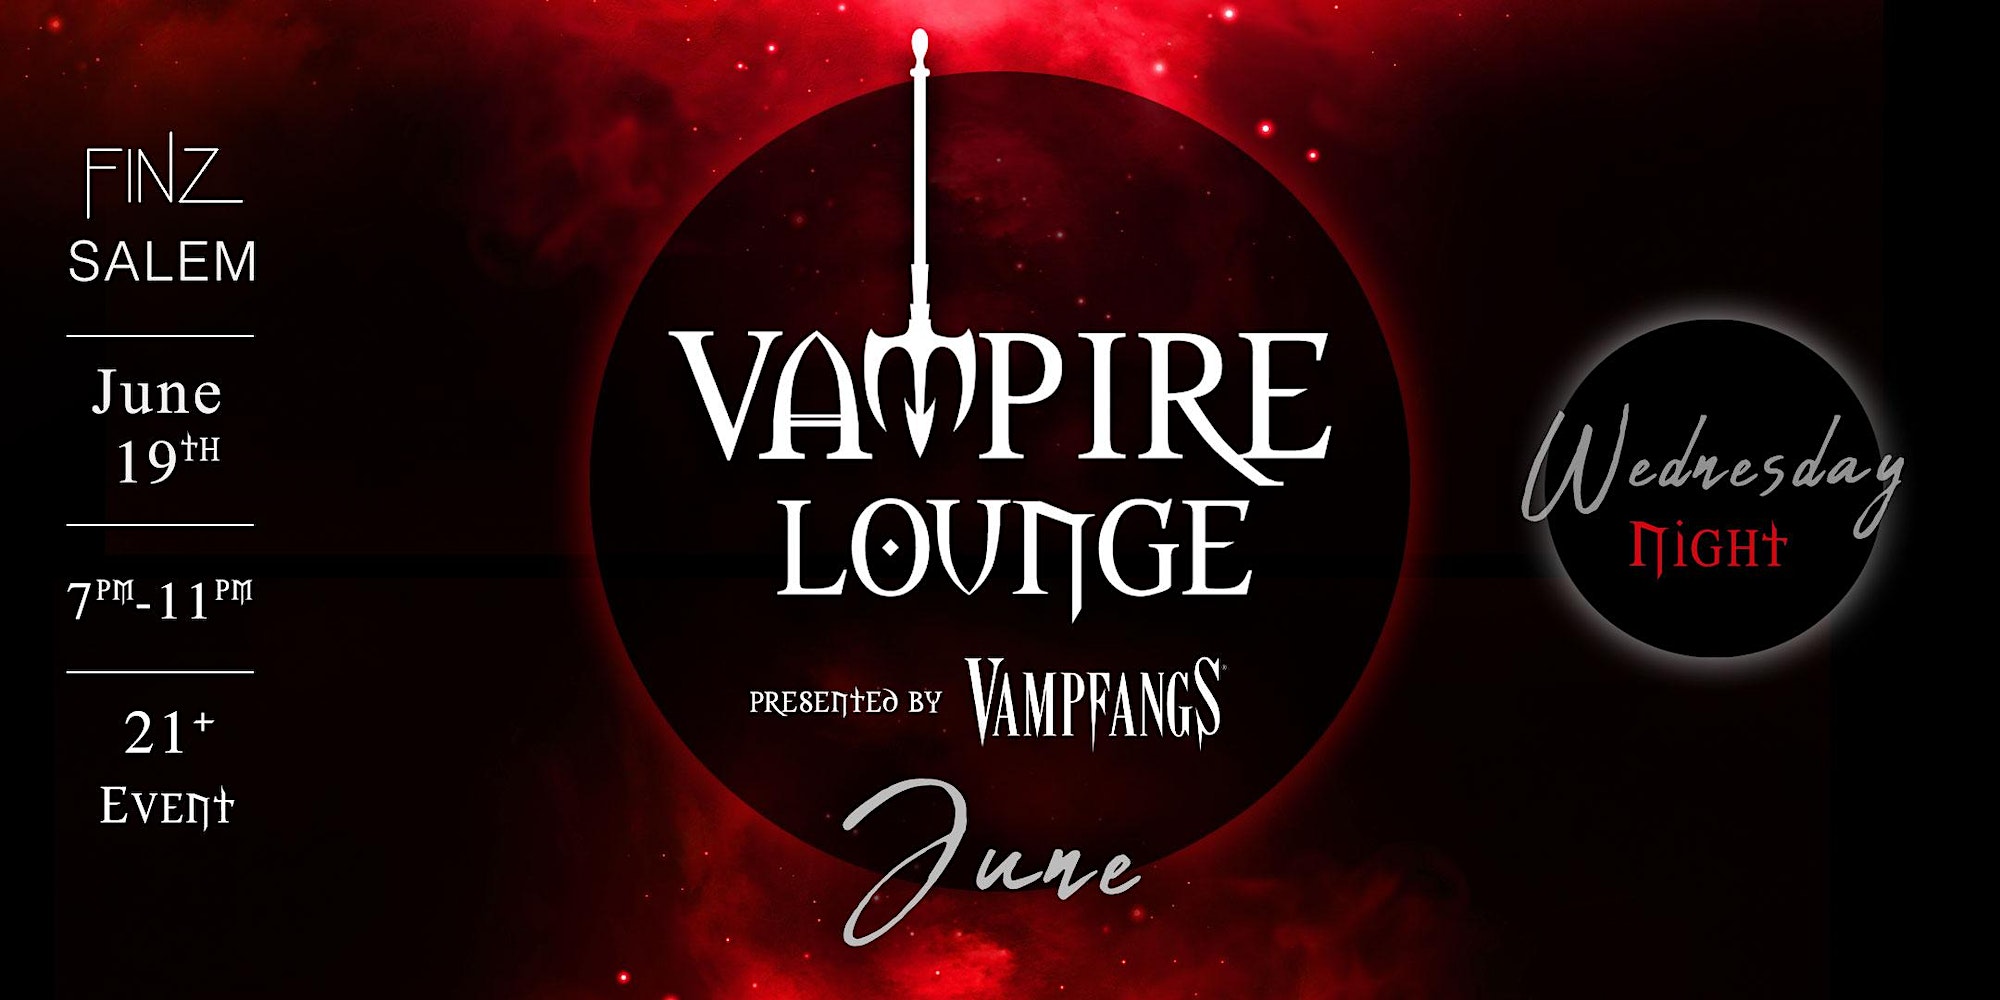 Experience the allure of a poster depicting a Vampire Lounge, dramatically set against an enchanting red backdrop. Perfect for enhancing intrigue and appealing to fans of the dark and nocturnal, this piece captures the essence of vampire lore. Great for SEO marketing, it effectively stimulates interest in those seeking unique lounge experiences.